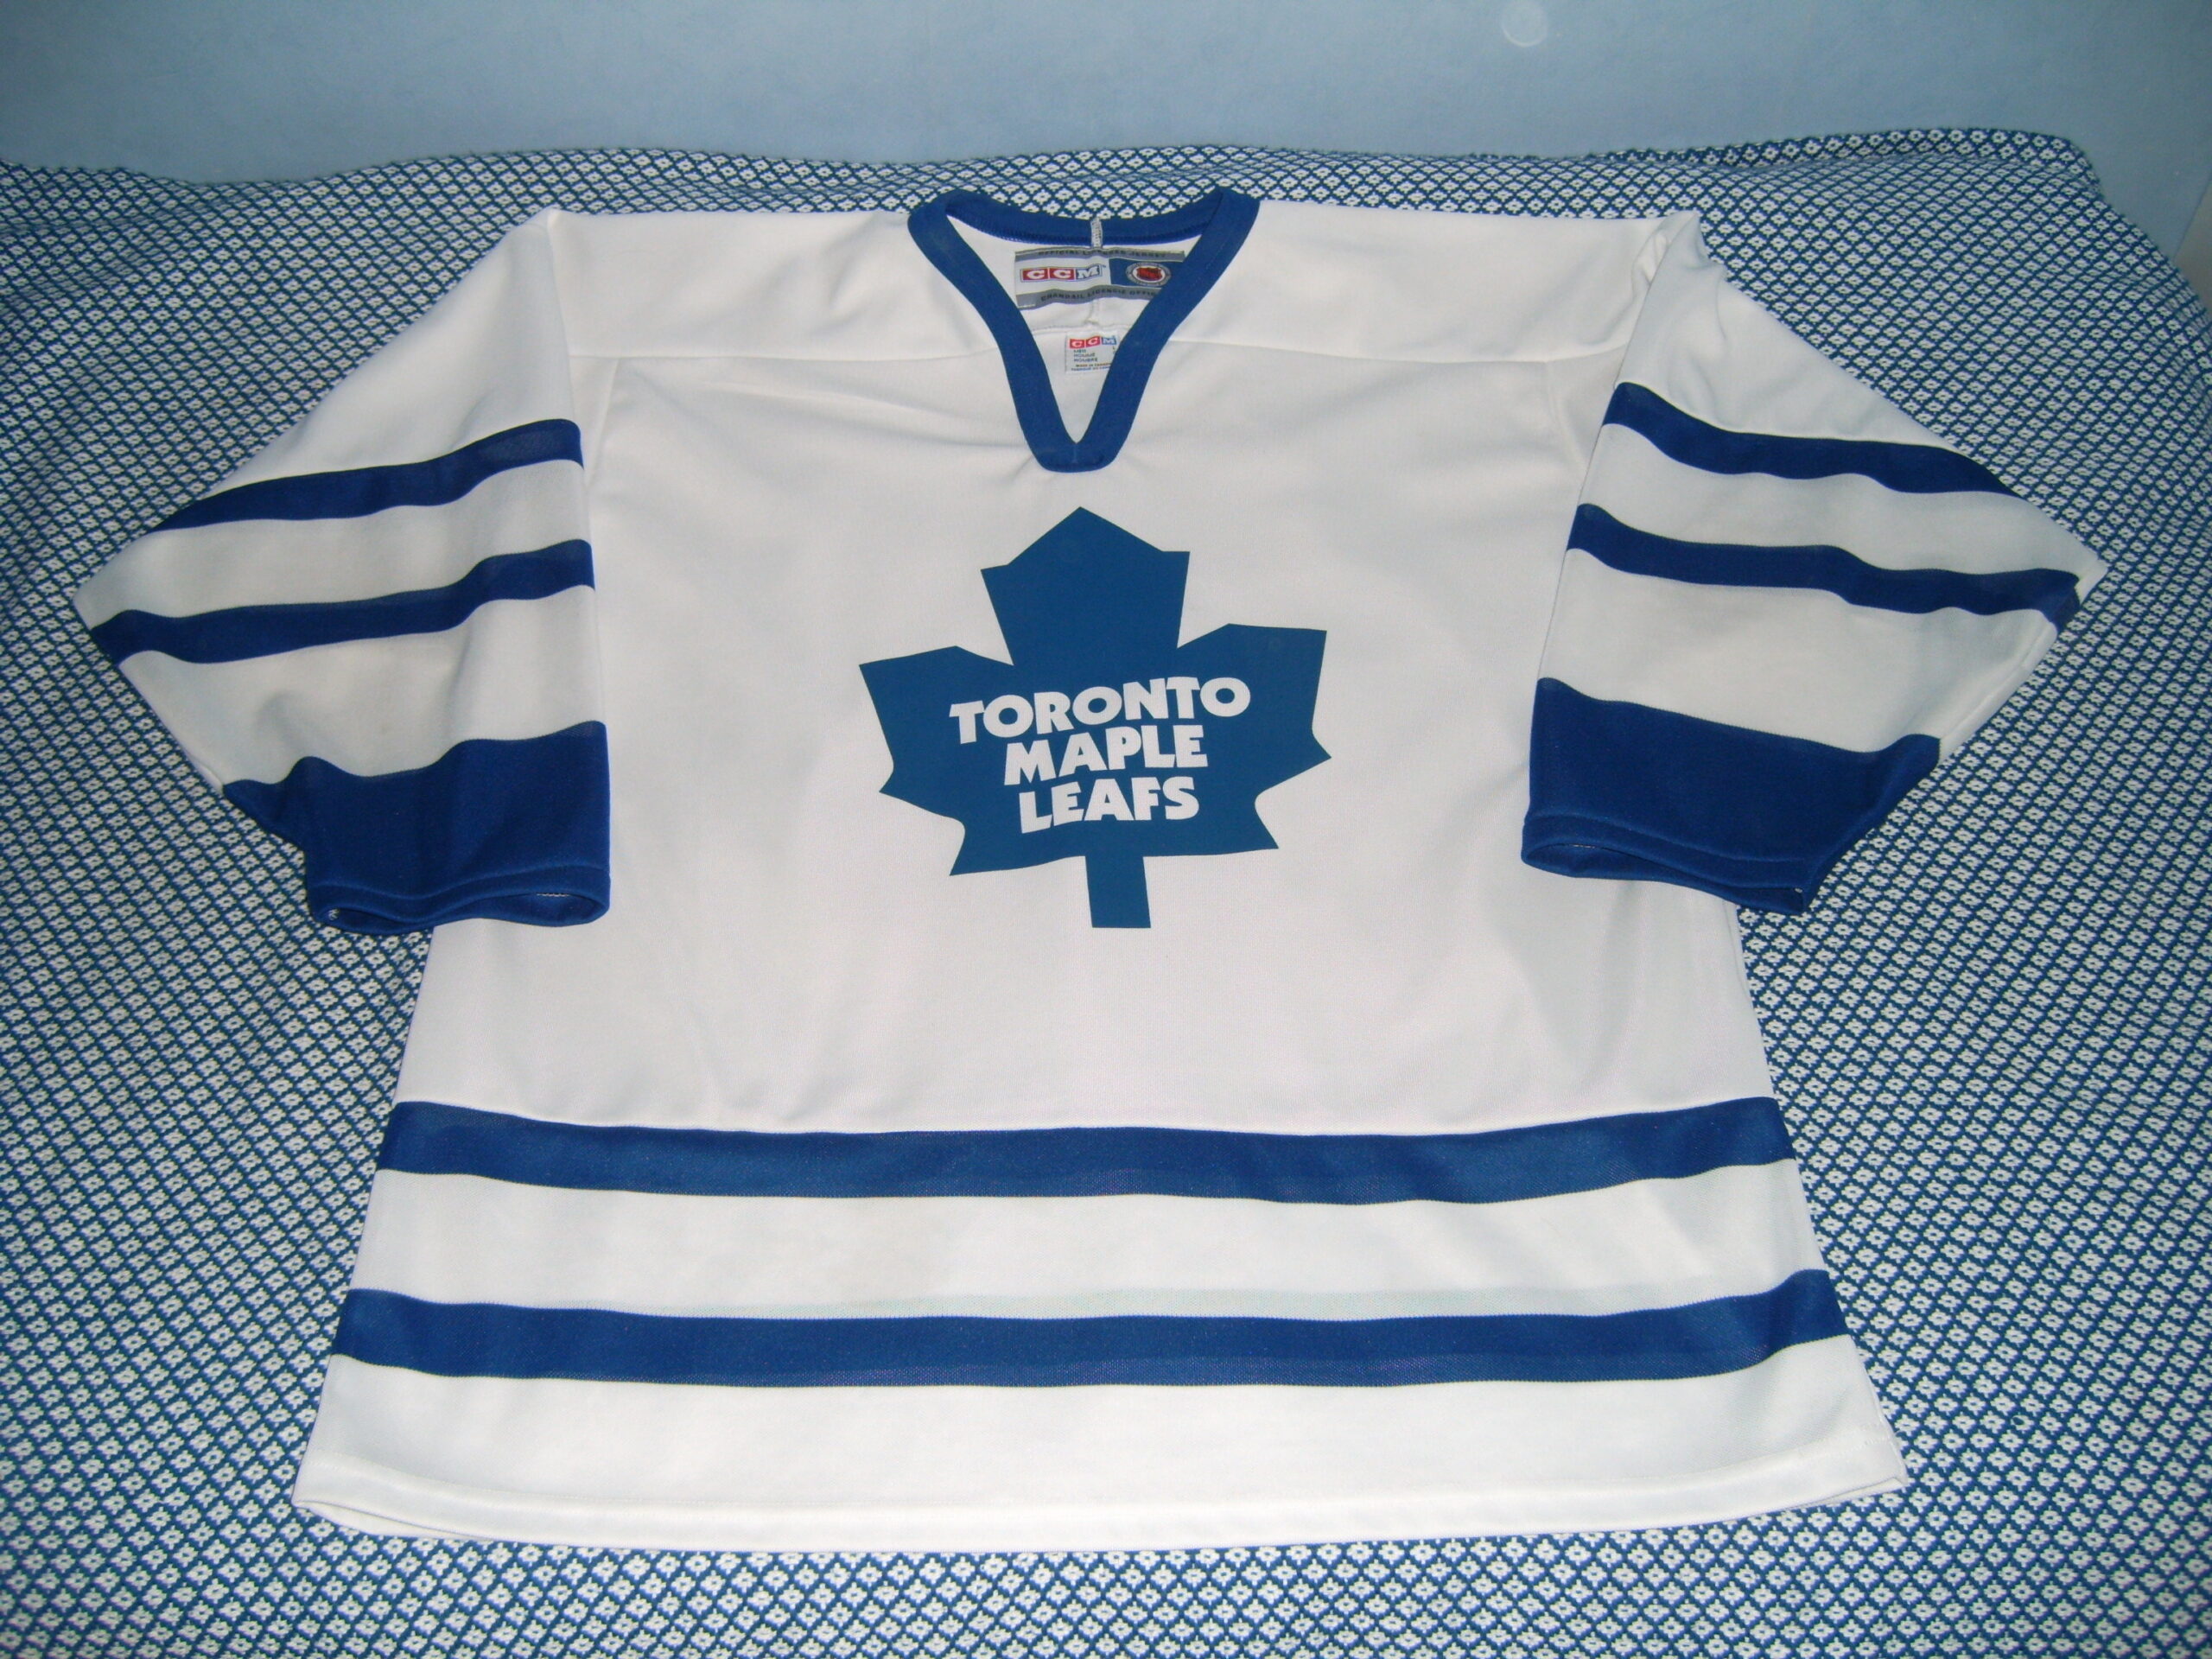 Toronto Maple Leafs Send Boxes of Team Apparel to Town Ravaged by